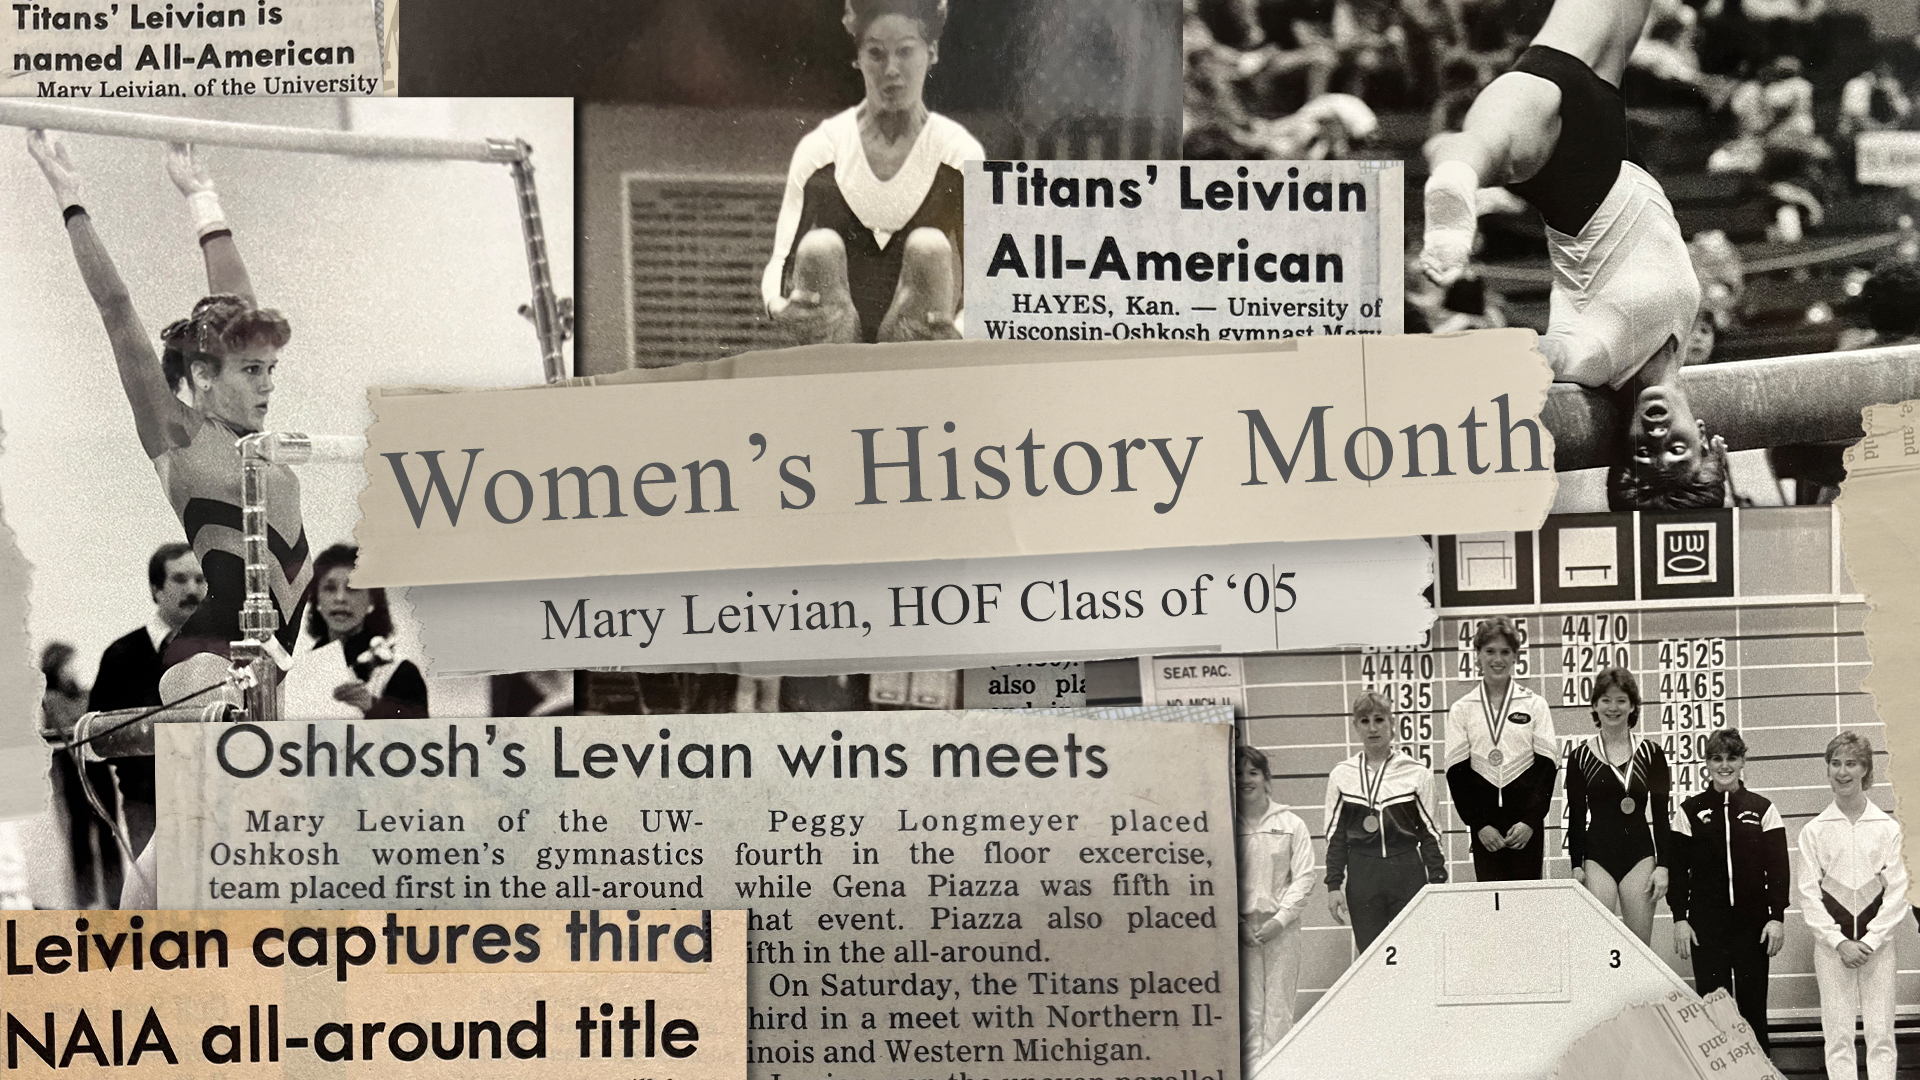 Women’s History Month, Mary (Leivian) Taylor (’05)